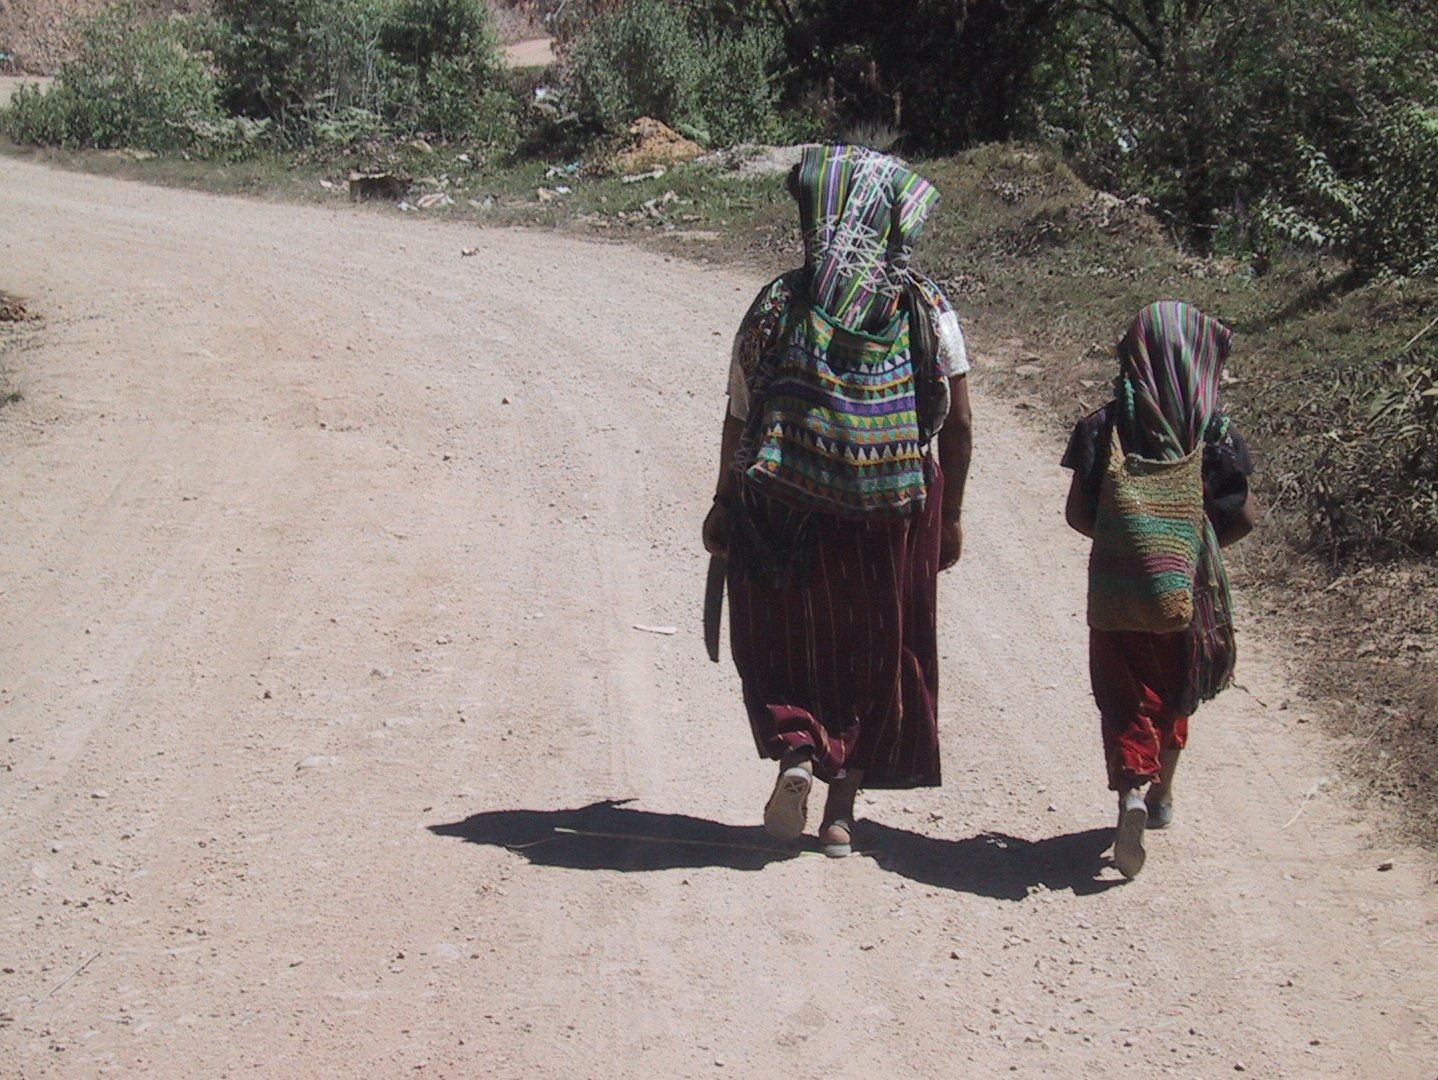 two women walk down a dirt road wearing colorful clothing